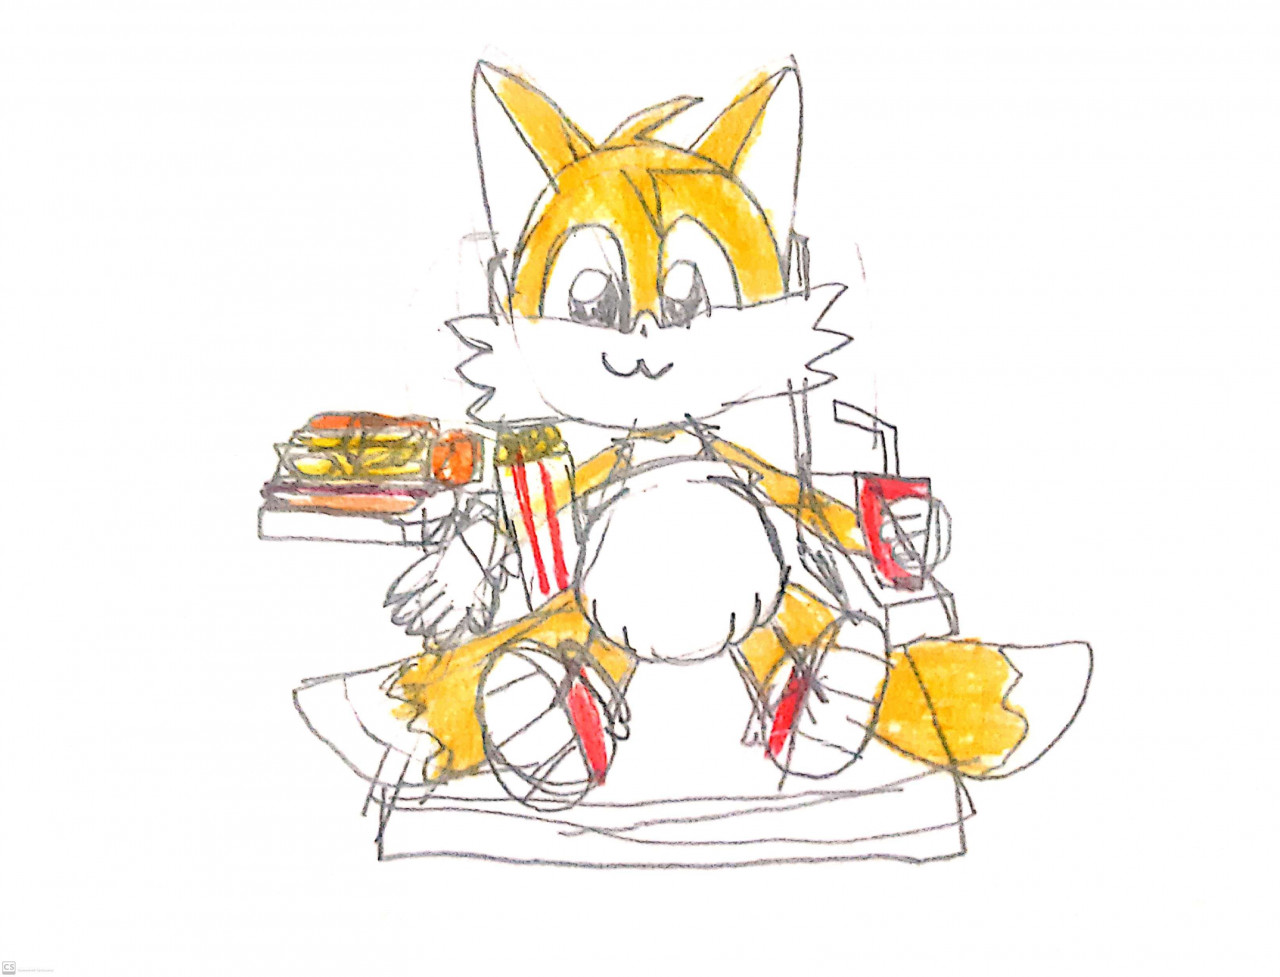 Pampered Classic Tails Lounging by Huskyknight750 -- Fur Affinity [dot] net